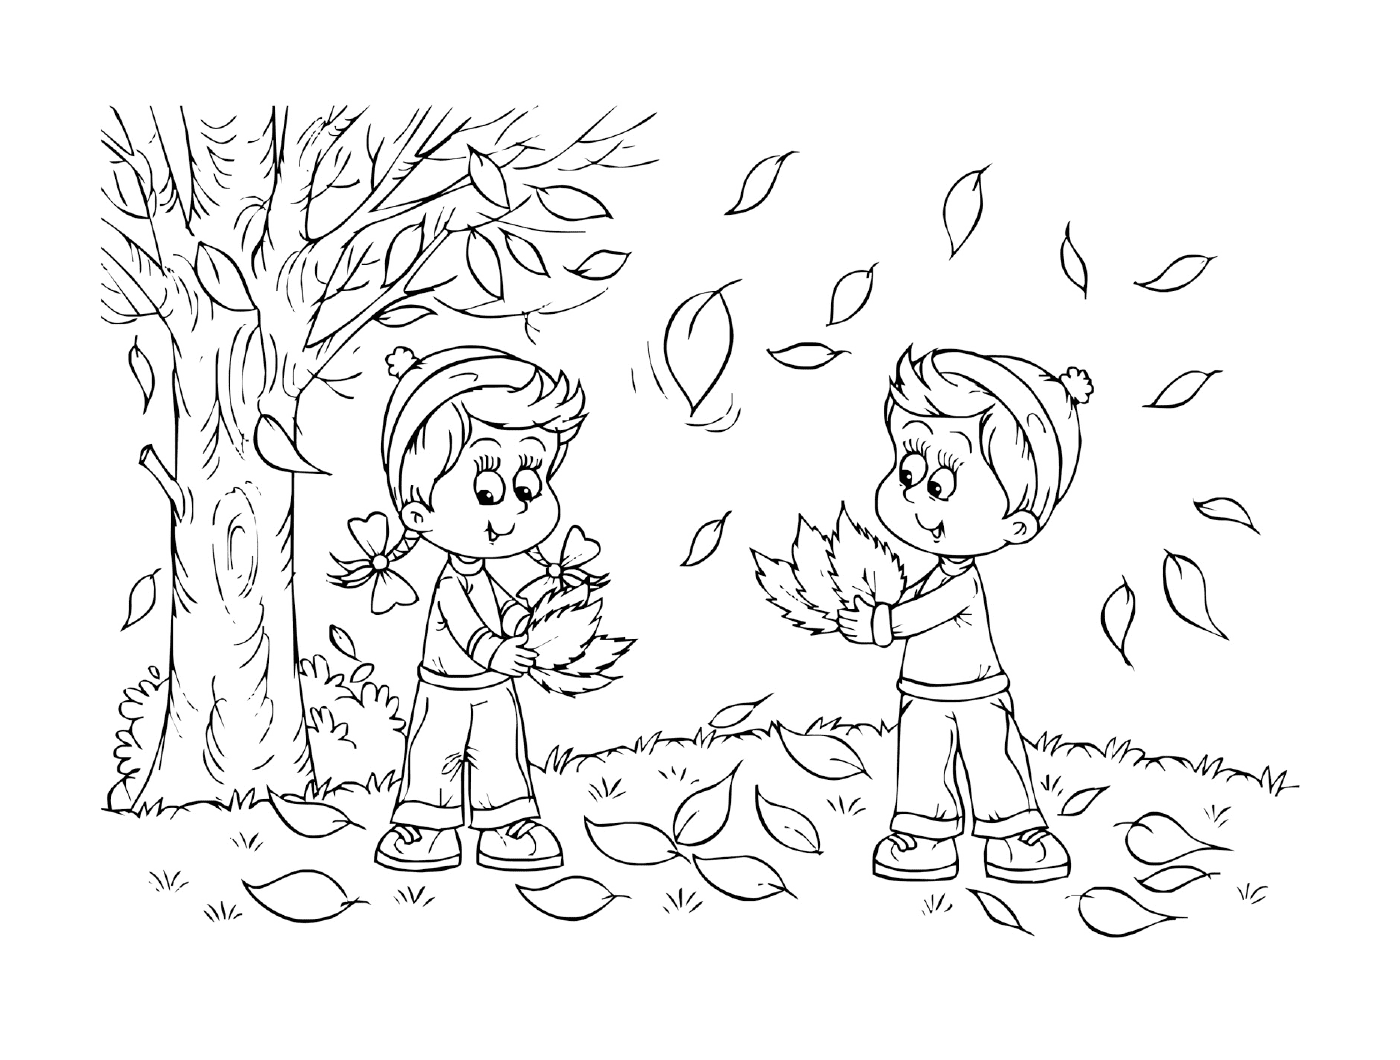  Two kids playing with leaves in a park 